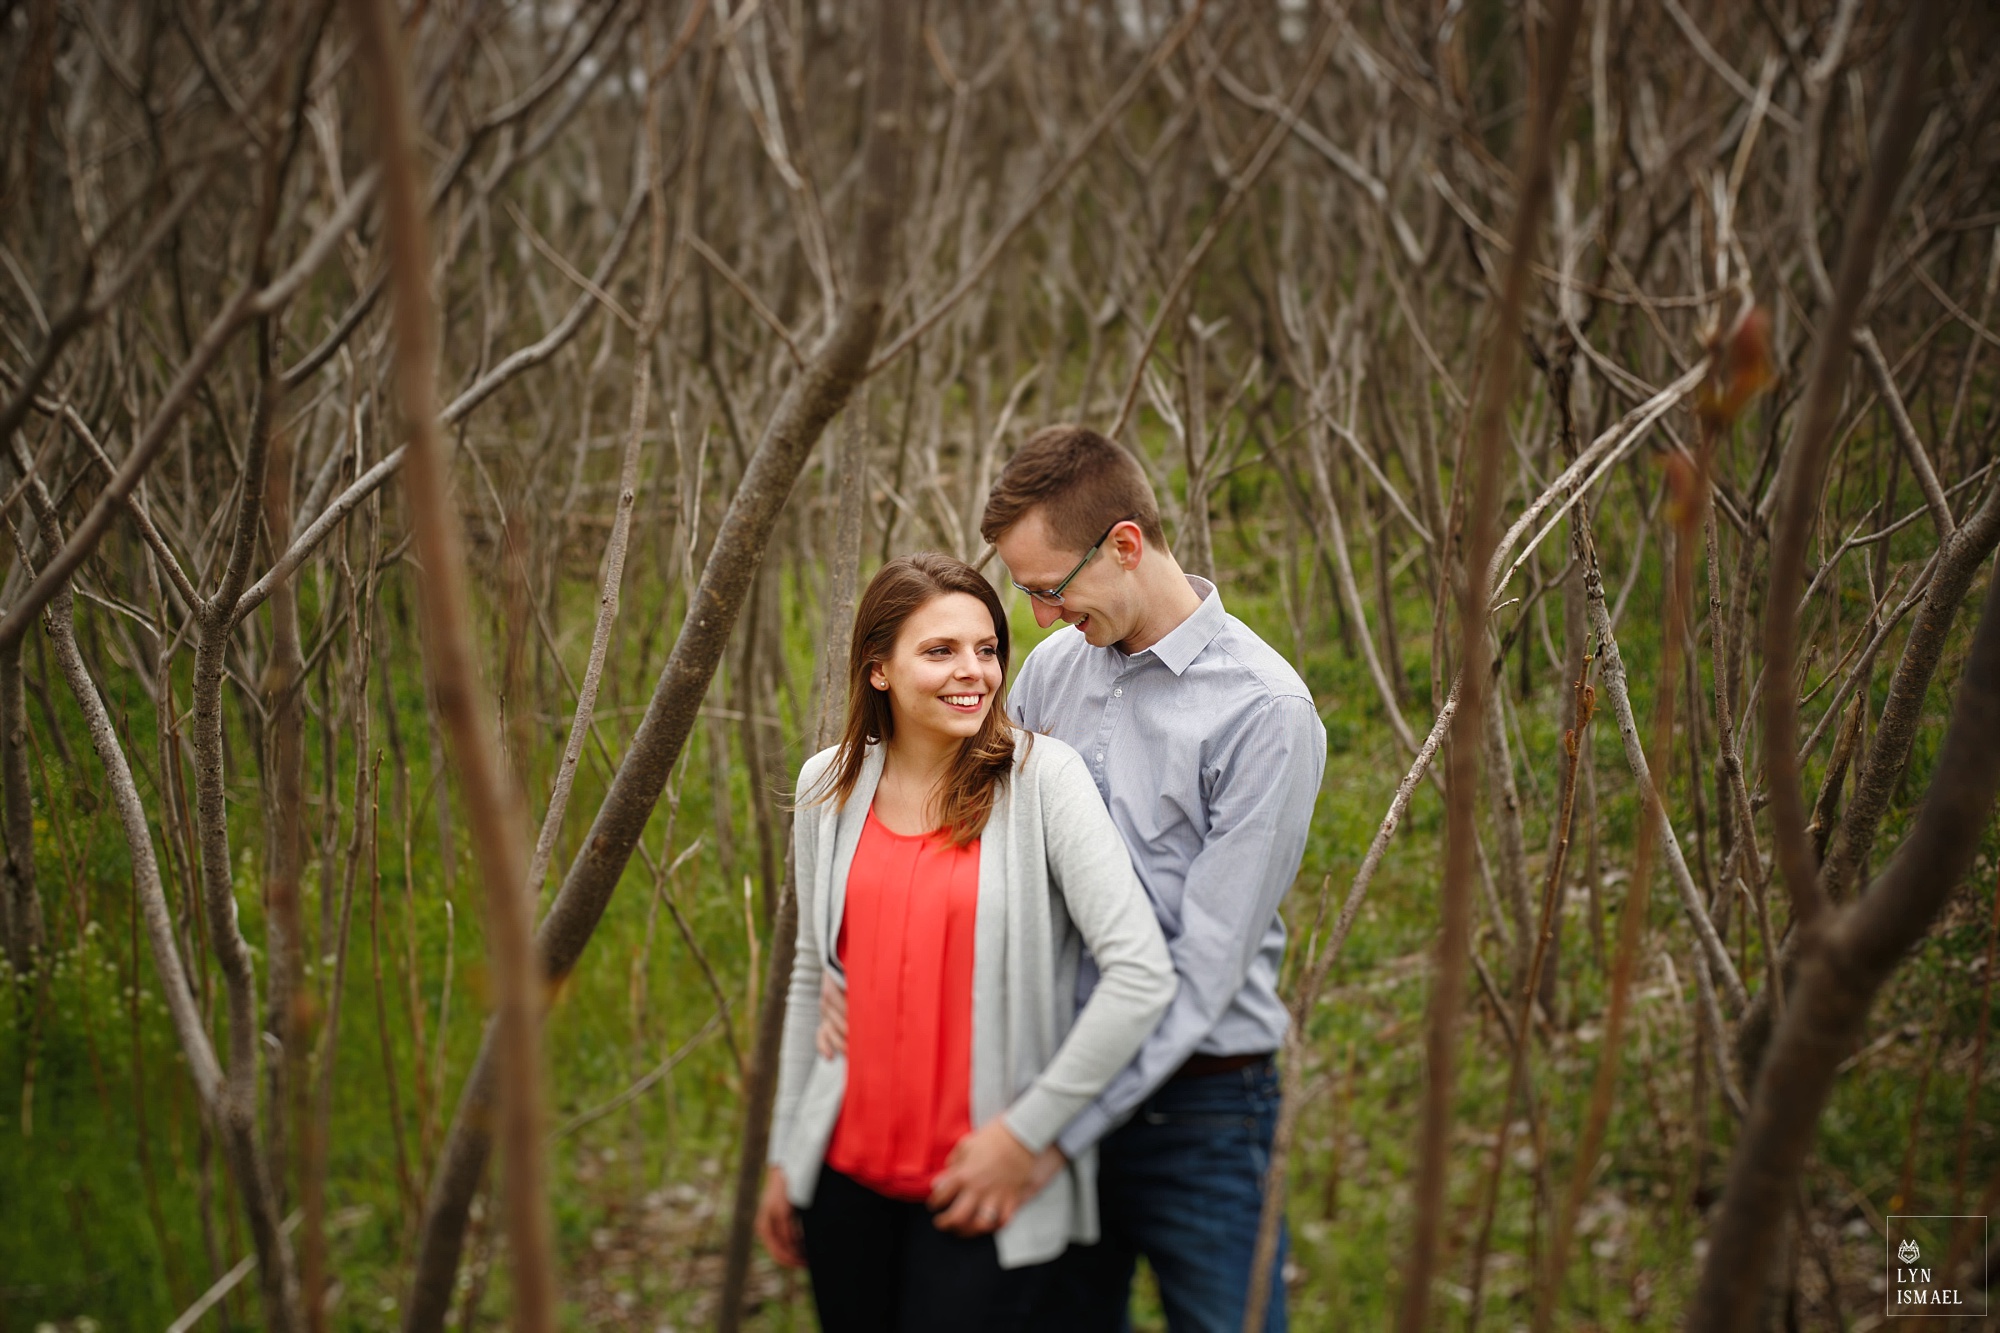 Natural location for an engagement session in Kitchener, Ontario.